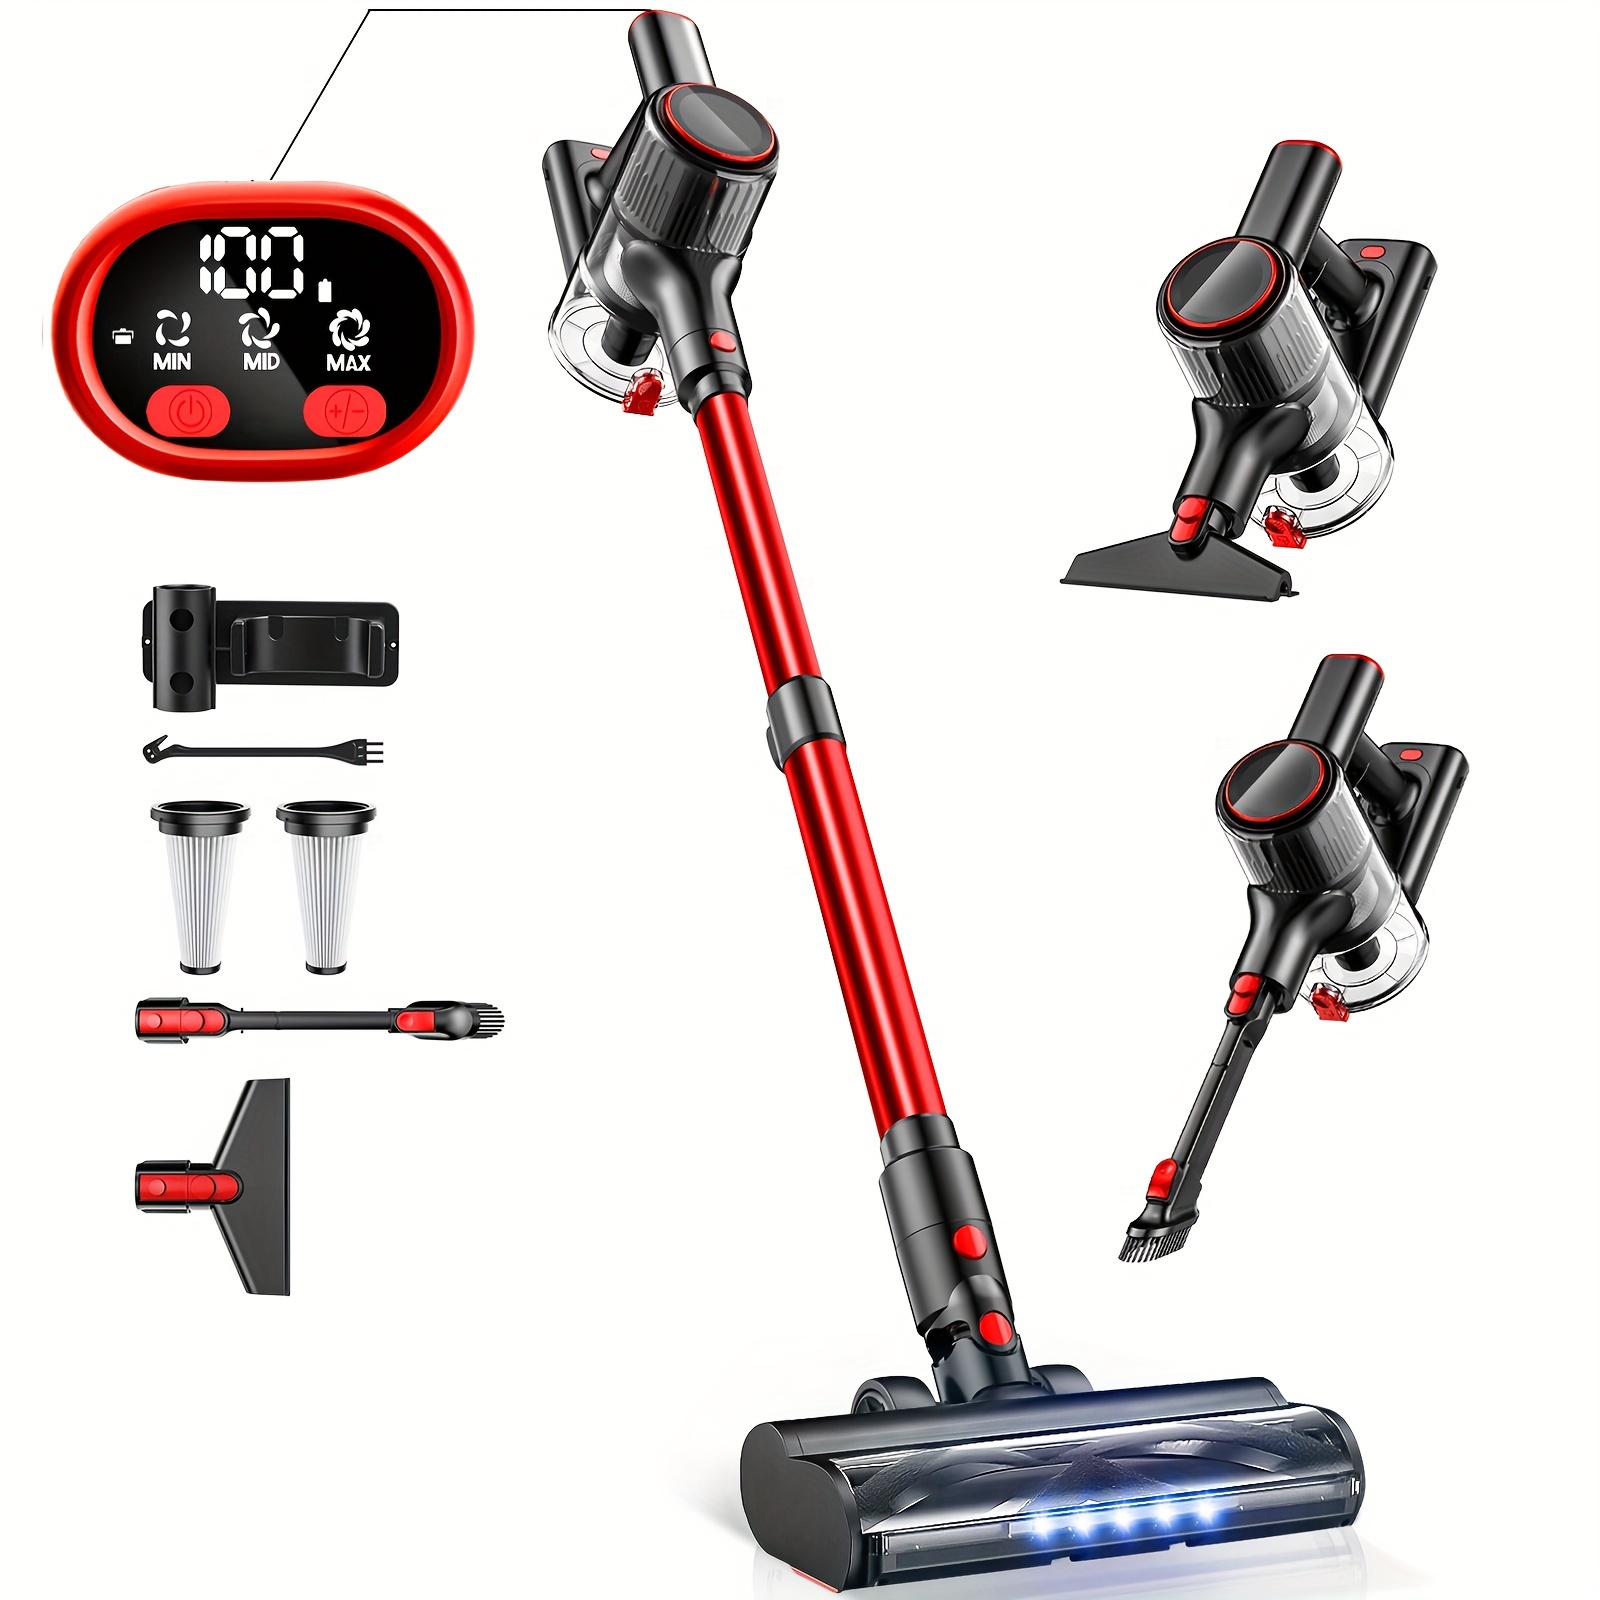 

1pc, Cordless Vacuum Cleaner, Powerful Suction Stick Vacuum With Led Display, 3 Suction Modes, Anti-tangle Lightweight Vacuum Cleaner For Home, Hardwood Floor, Carpets, Pet Hair